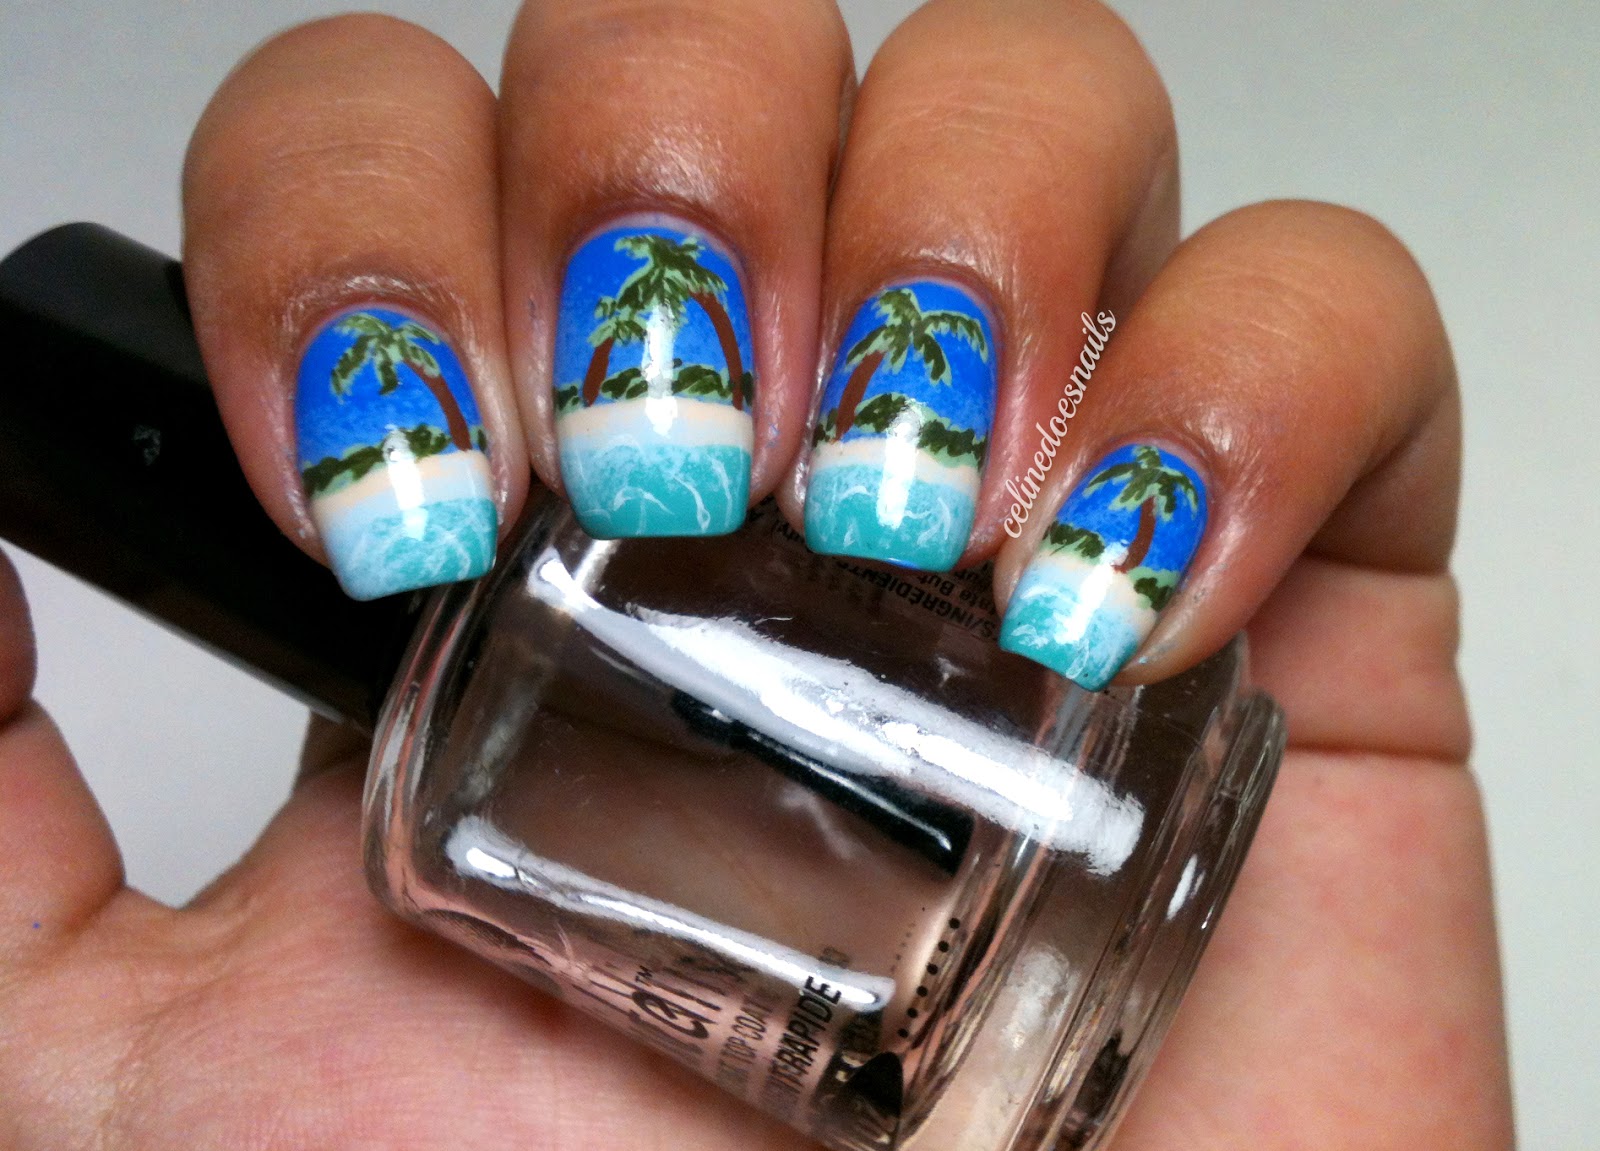 2. "Festive Palm Tree Nail Designs for the Holidays" - wide 1